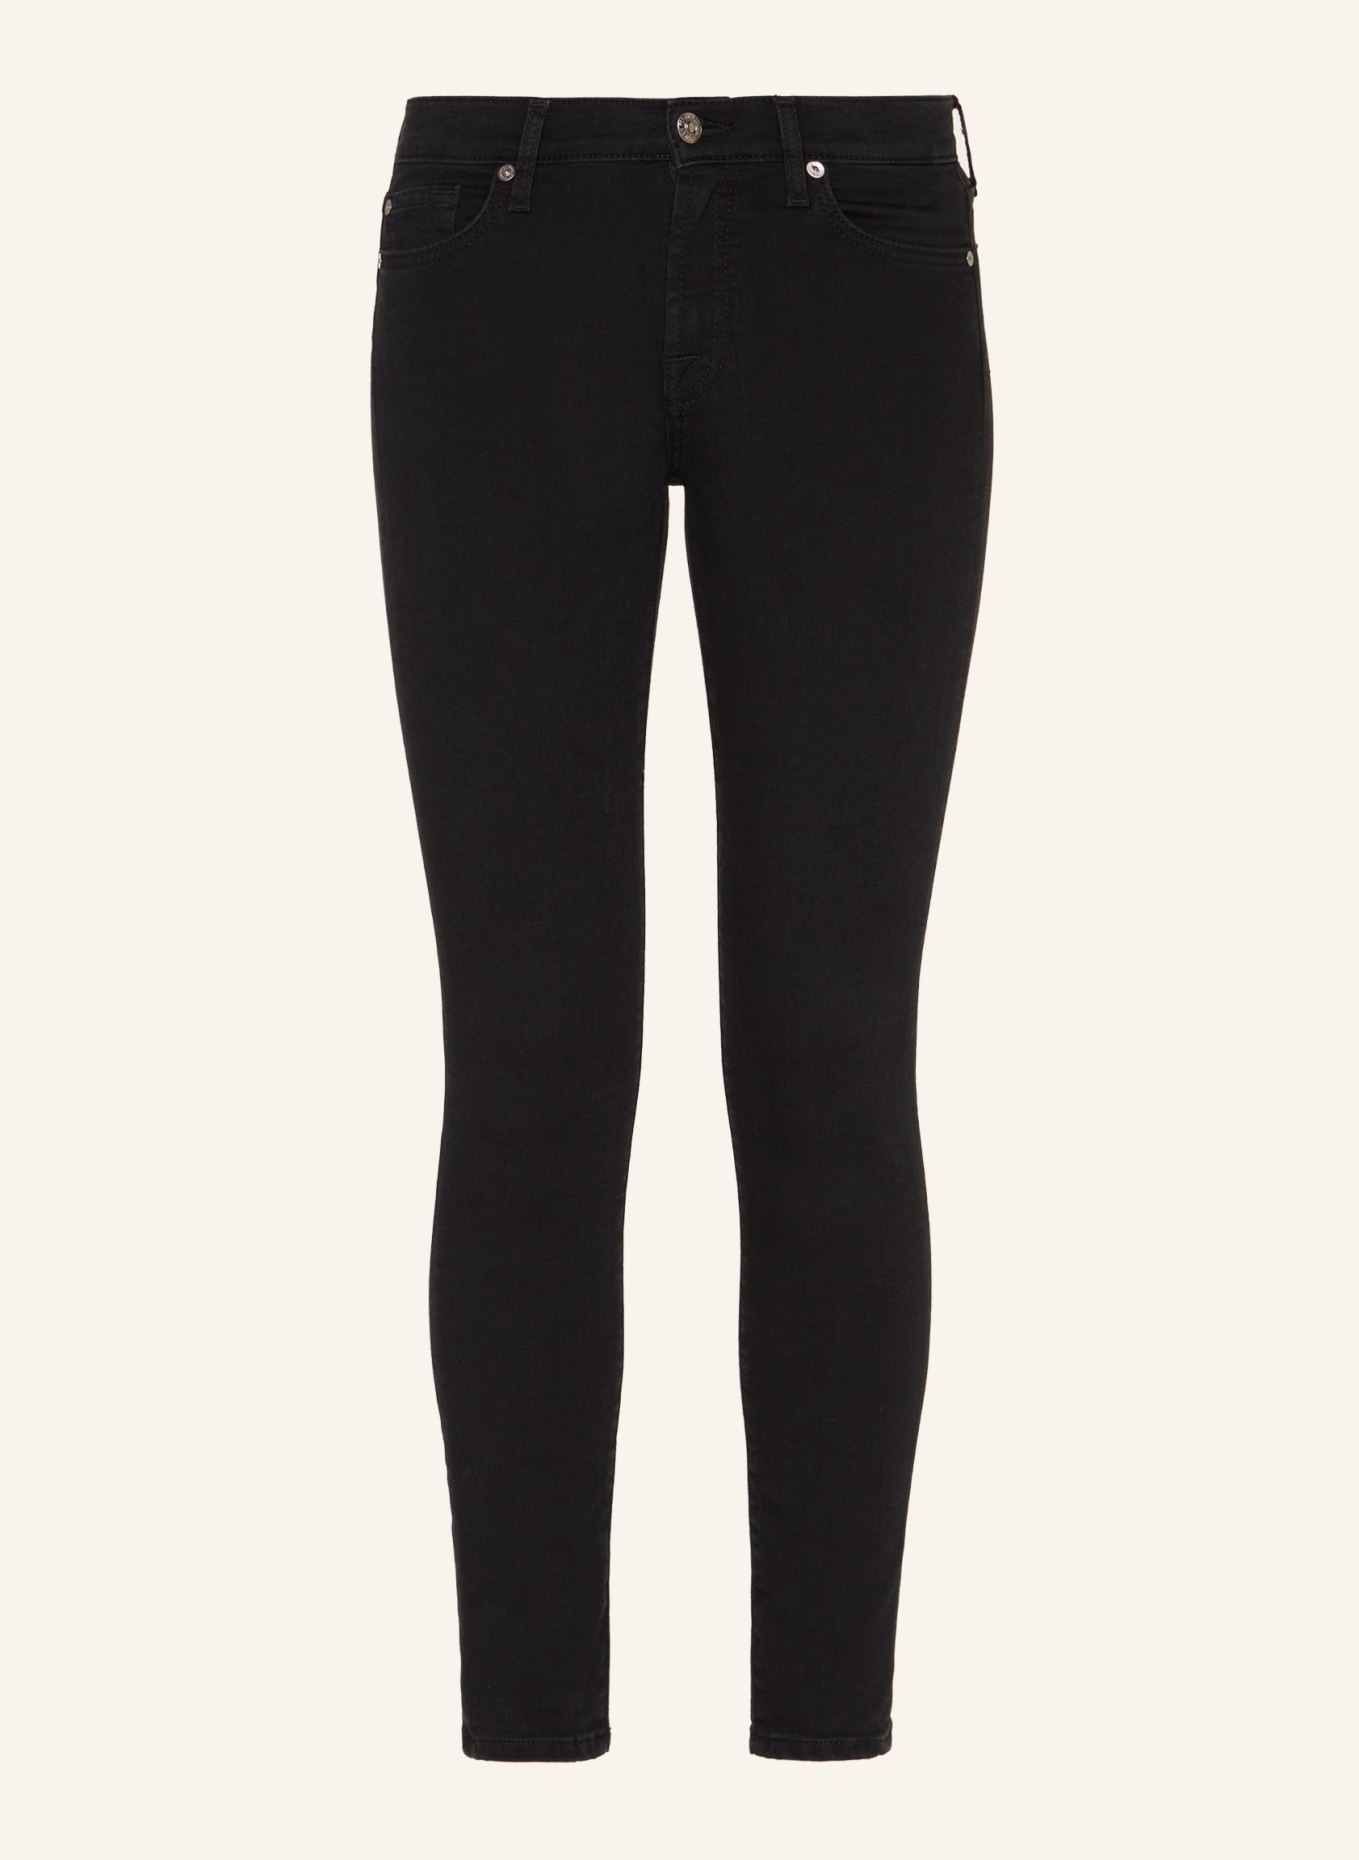 7 for all mankind Jeans THE SKINNY CROP Skinny Fit, Farbe: SCHWARZ (Bild 1)